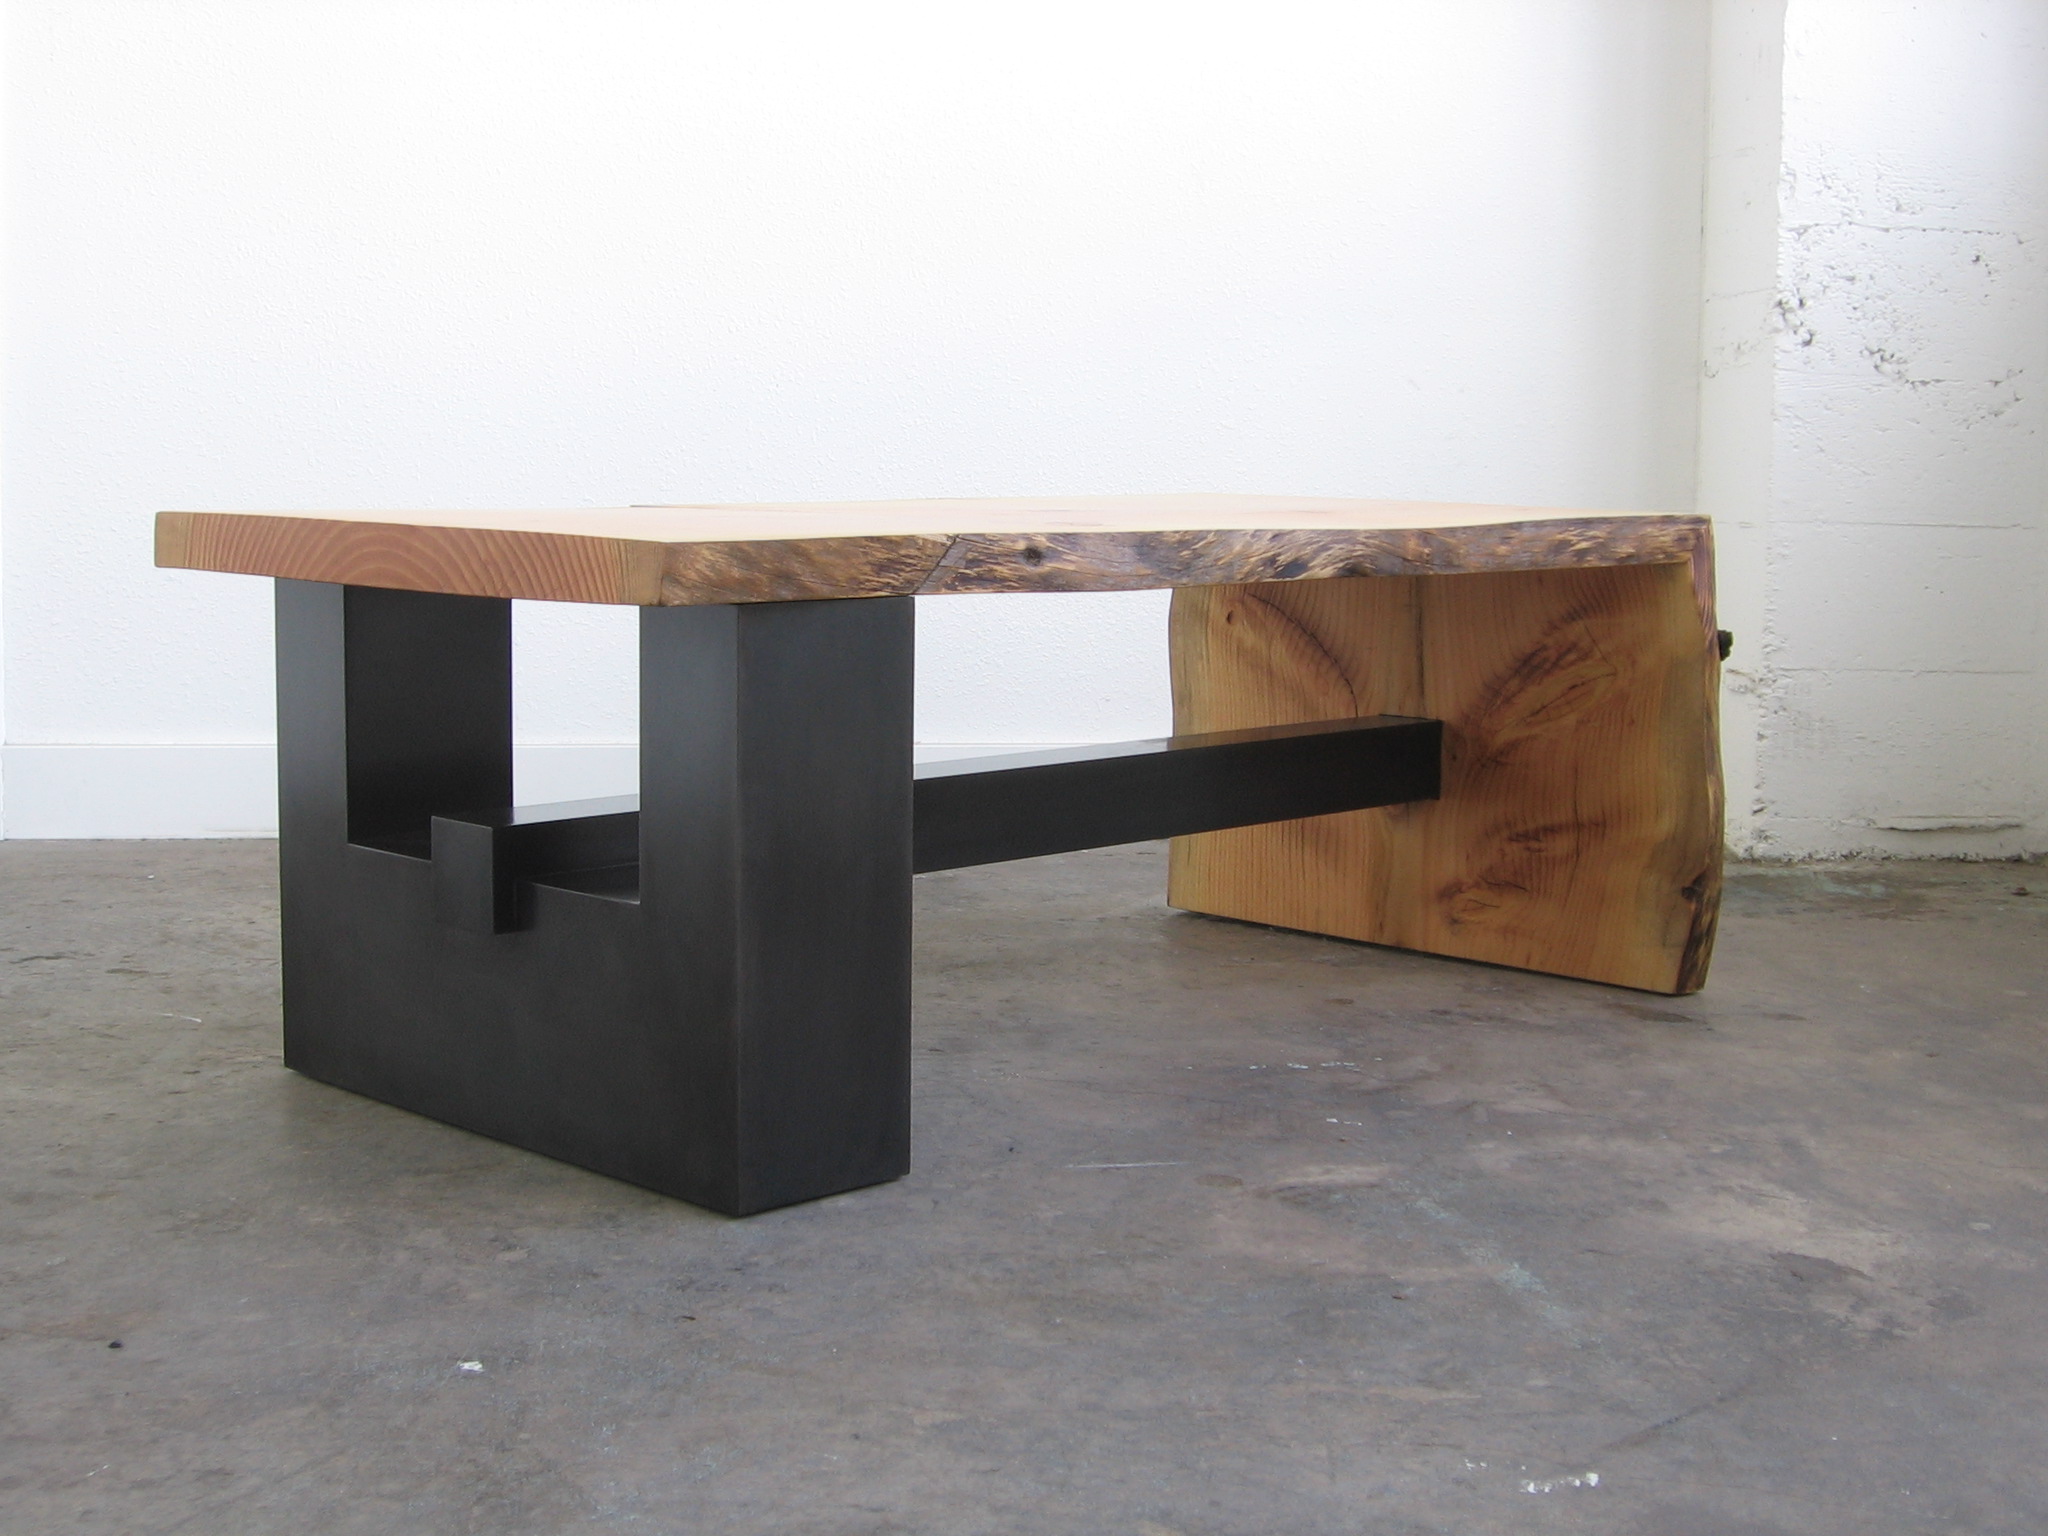  Blackened Steel Base with a live edge top that was taken from the residence property.  Designed by Formed Objects 